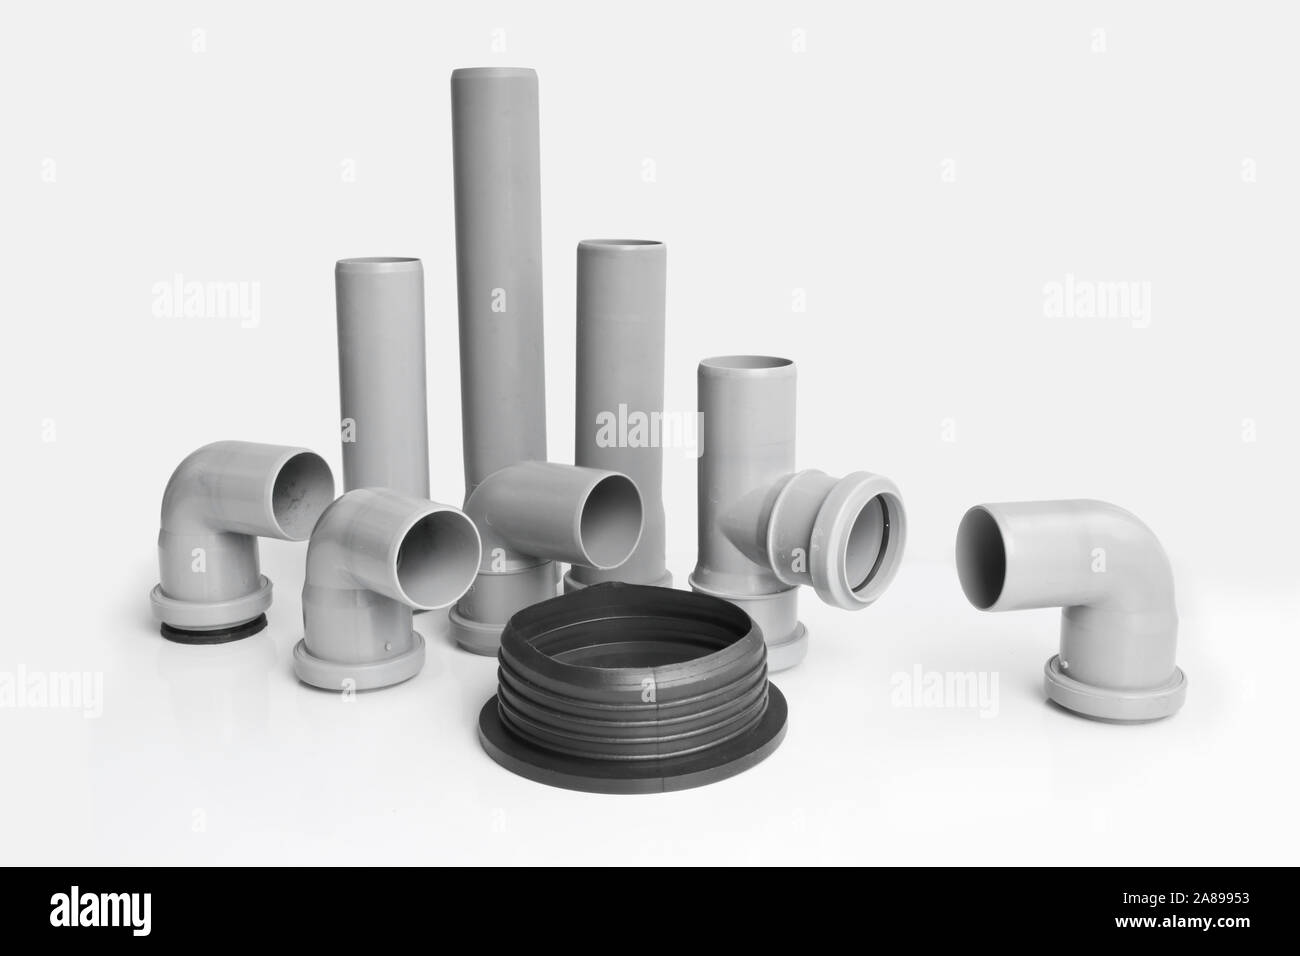 Plastic PVC pipes sewer fittings on a light background. Stock Photo